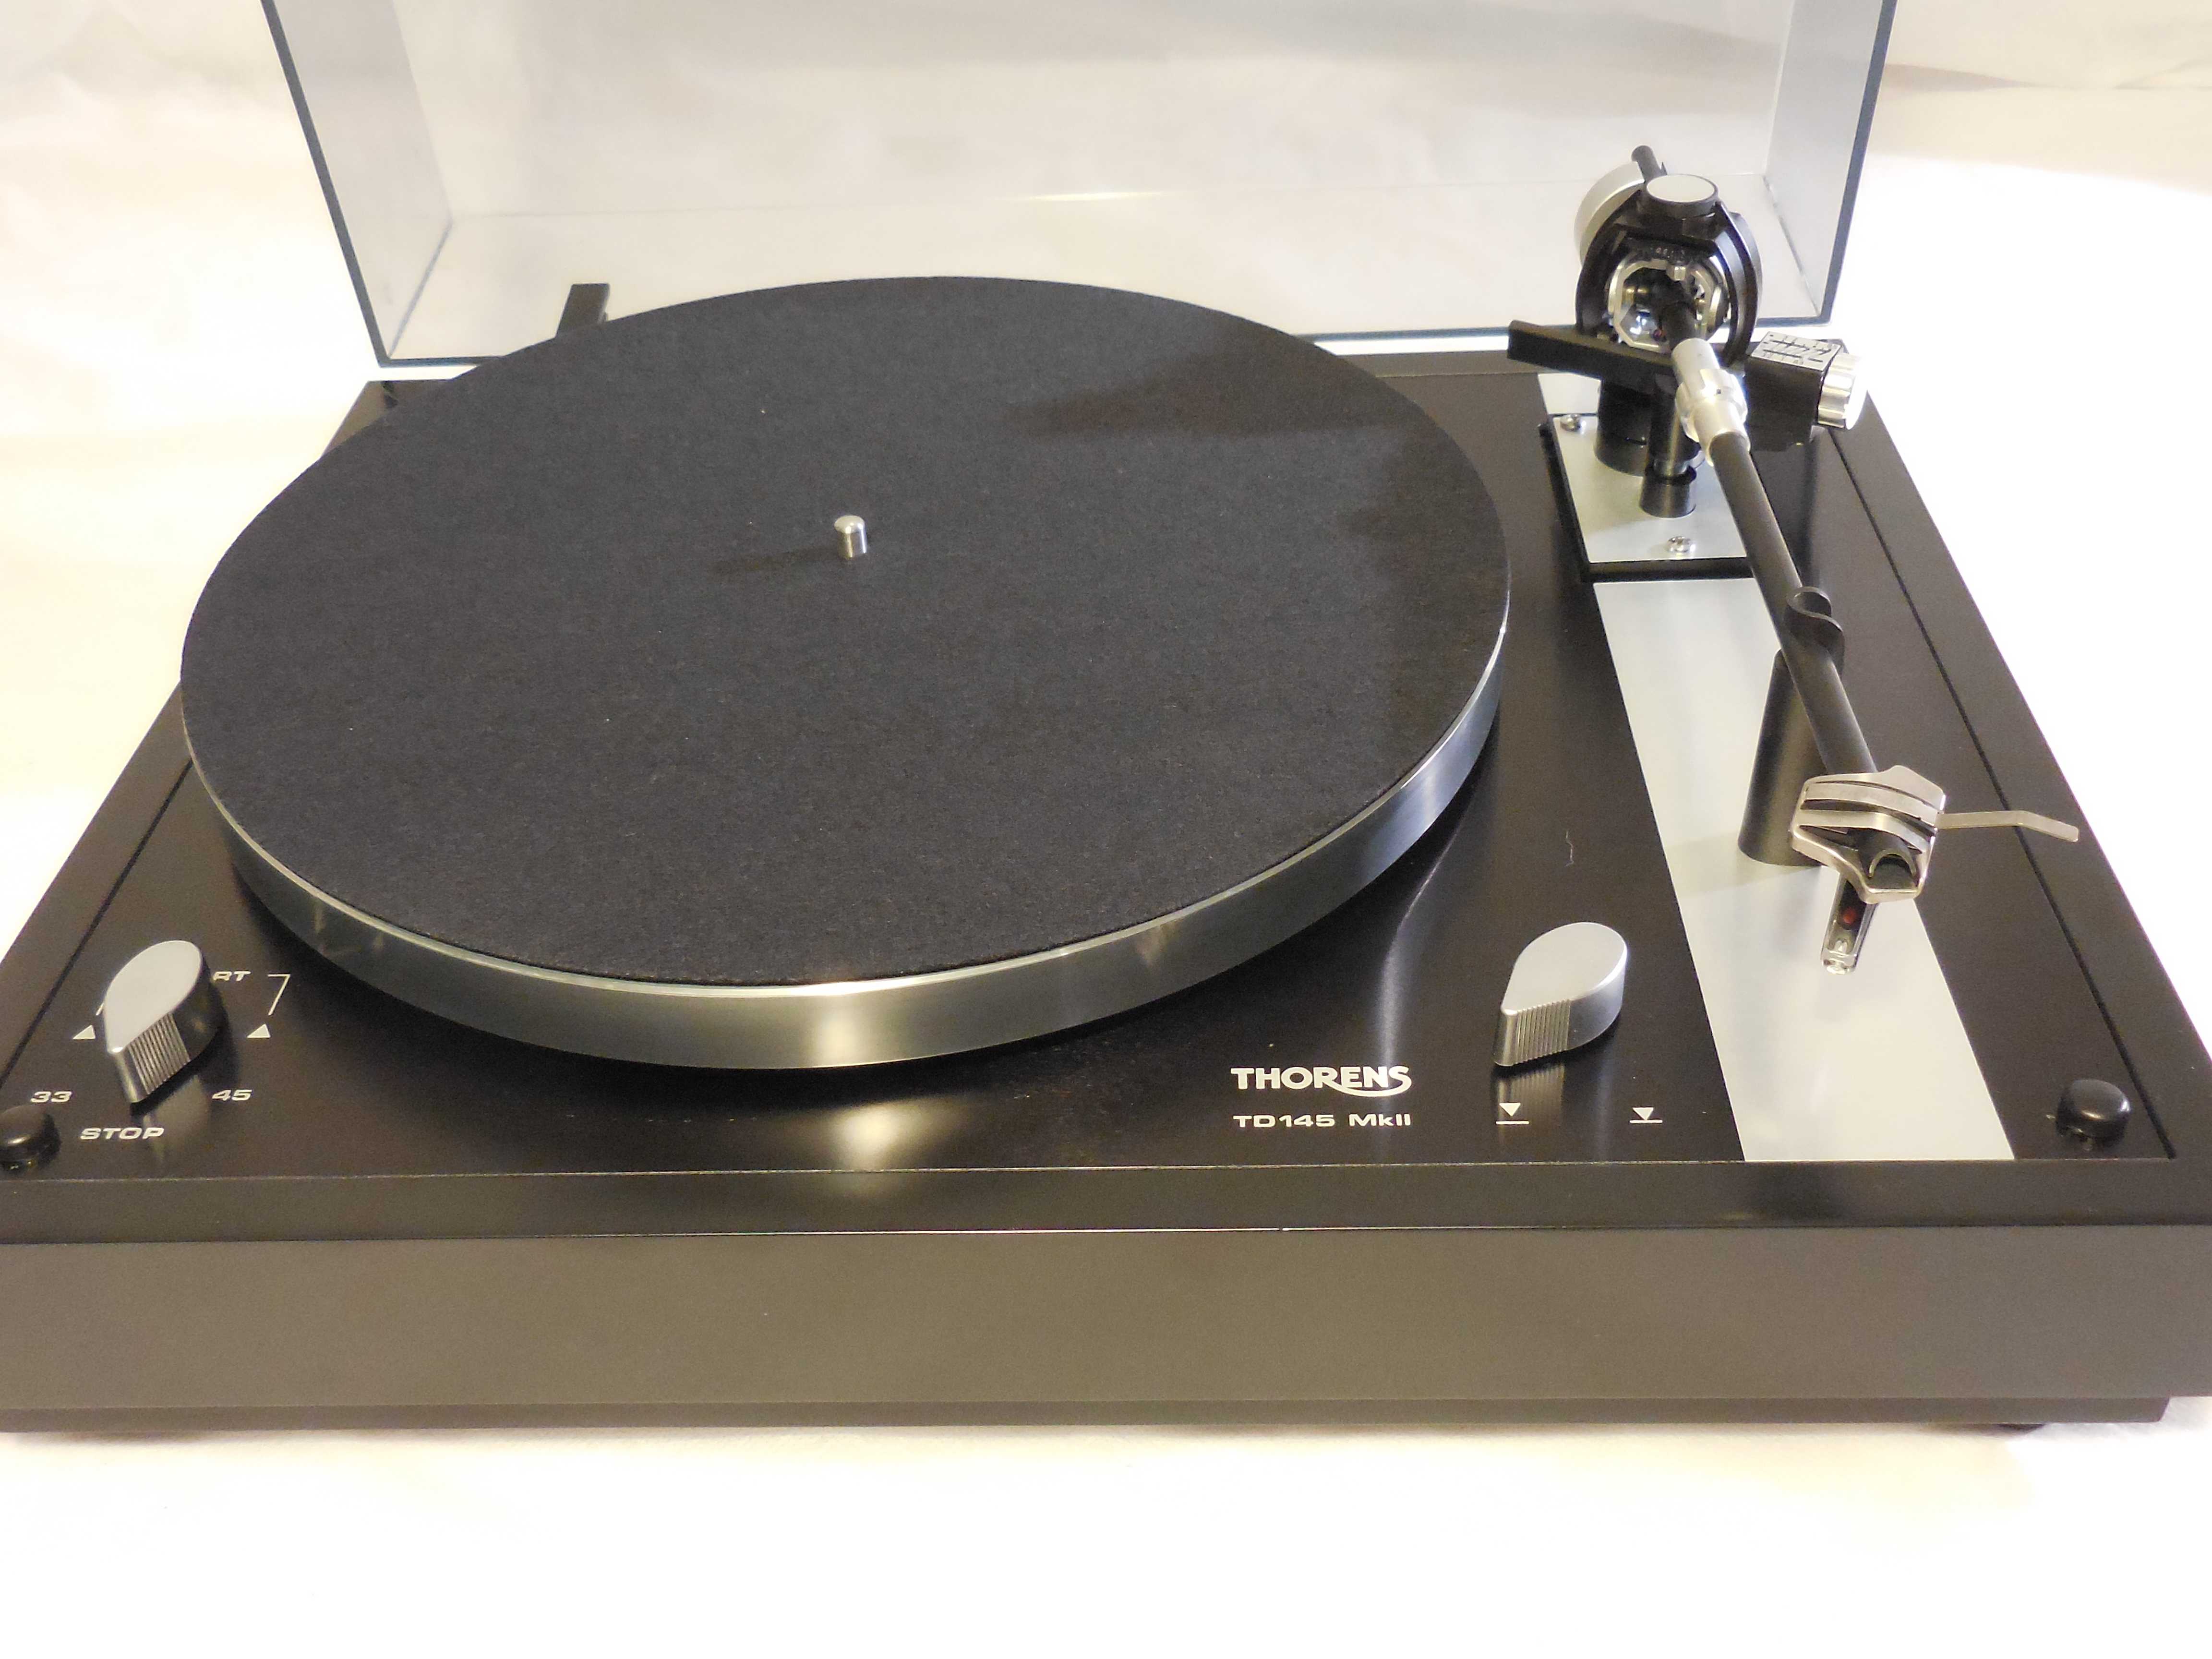 Thorens td 1601 review - blast from the past « 7review